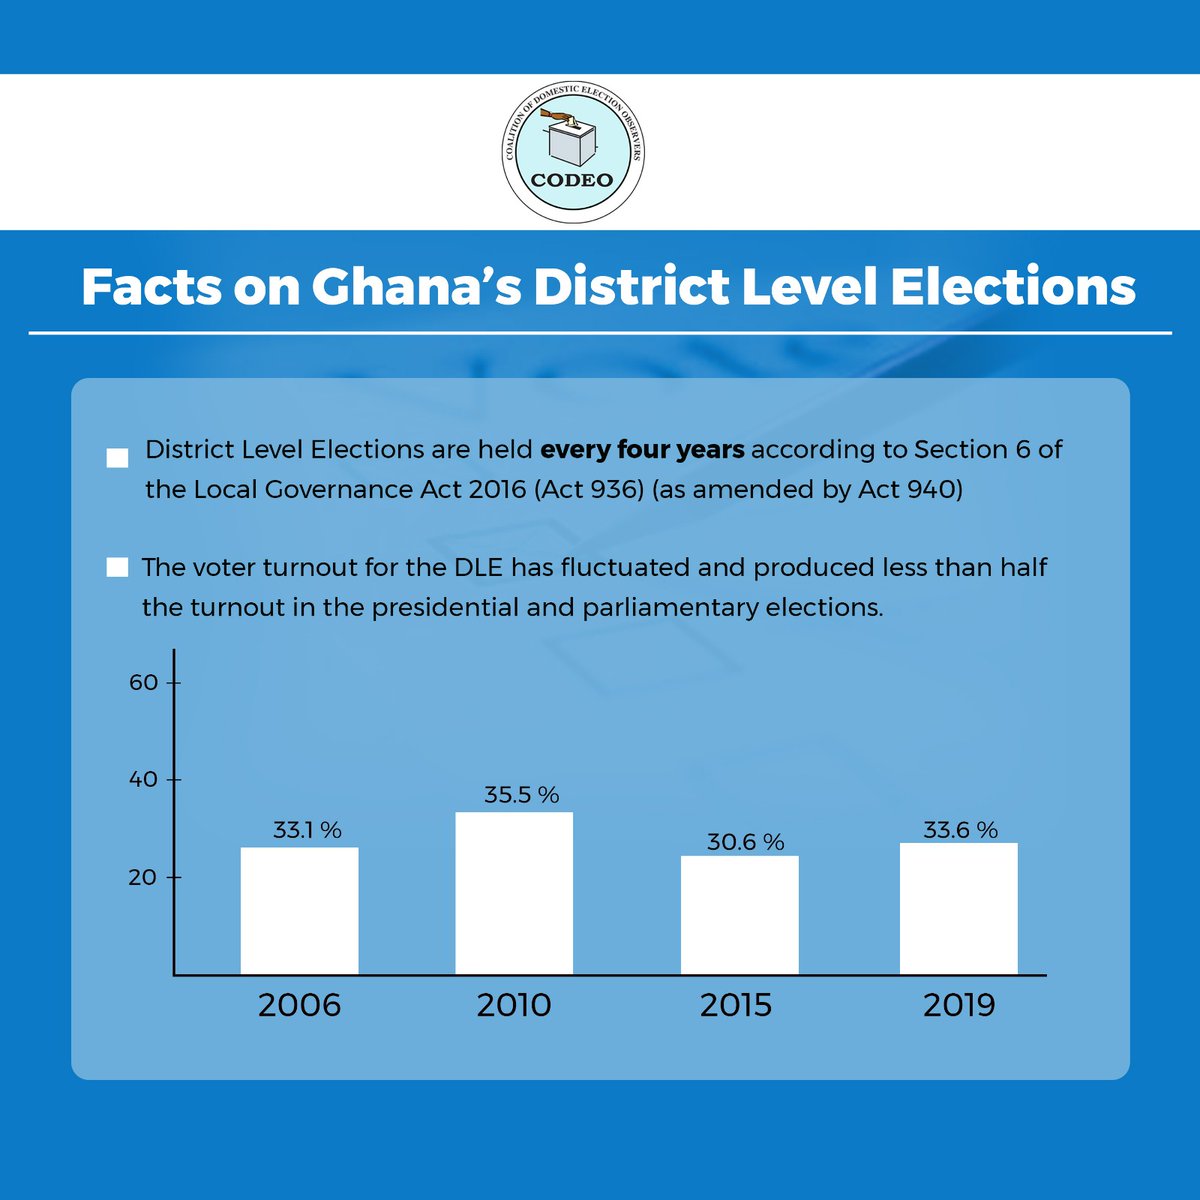 From grassroots representation to community impact, see the structure of local governance in Ghana. #CODEOElections #DistrictLevelElections23 #ElectionObservation